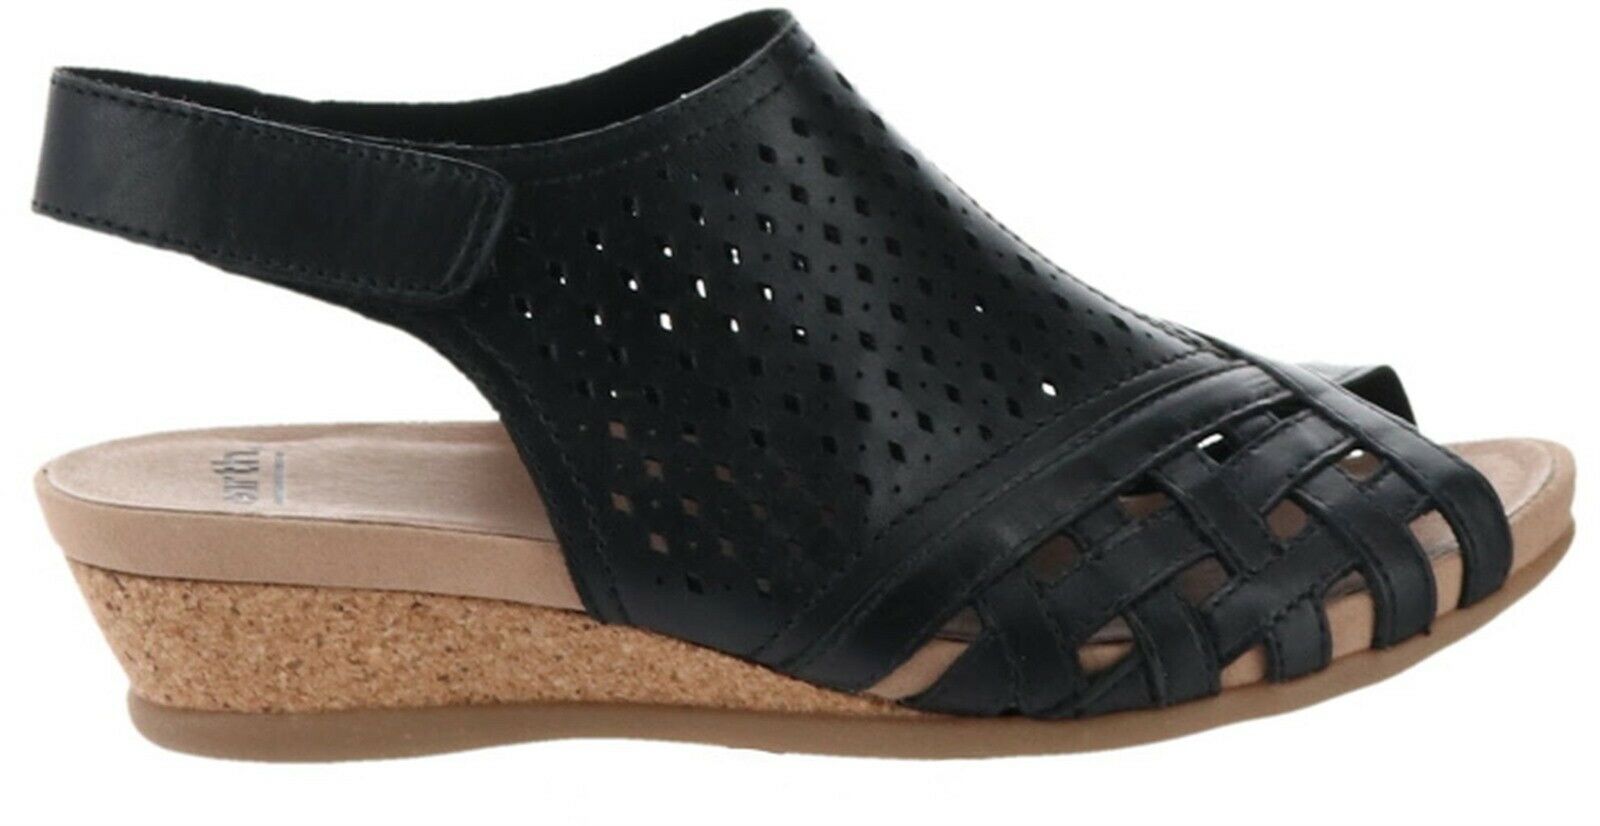 Details about   EARTH Women's Pisa Galli Perforated Wedge Sandals Genuine Leather Various